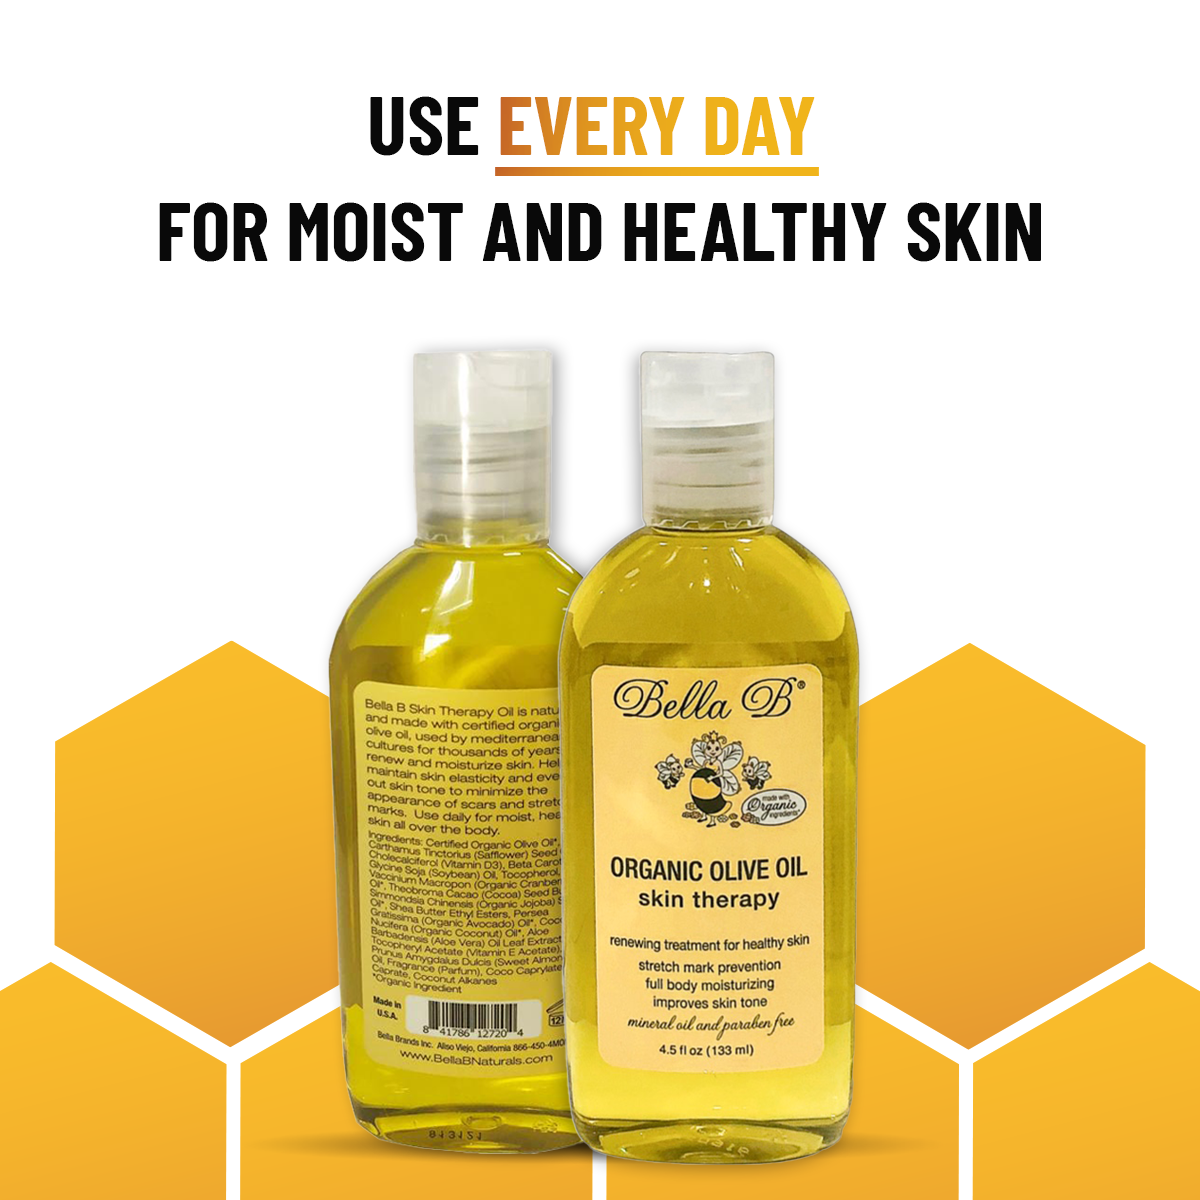 Organic Olive Oil Skin Therapy, 4.5oz Bottle